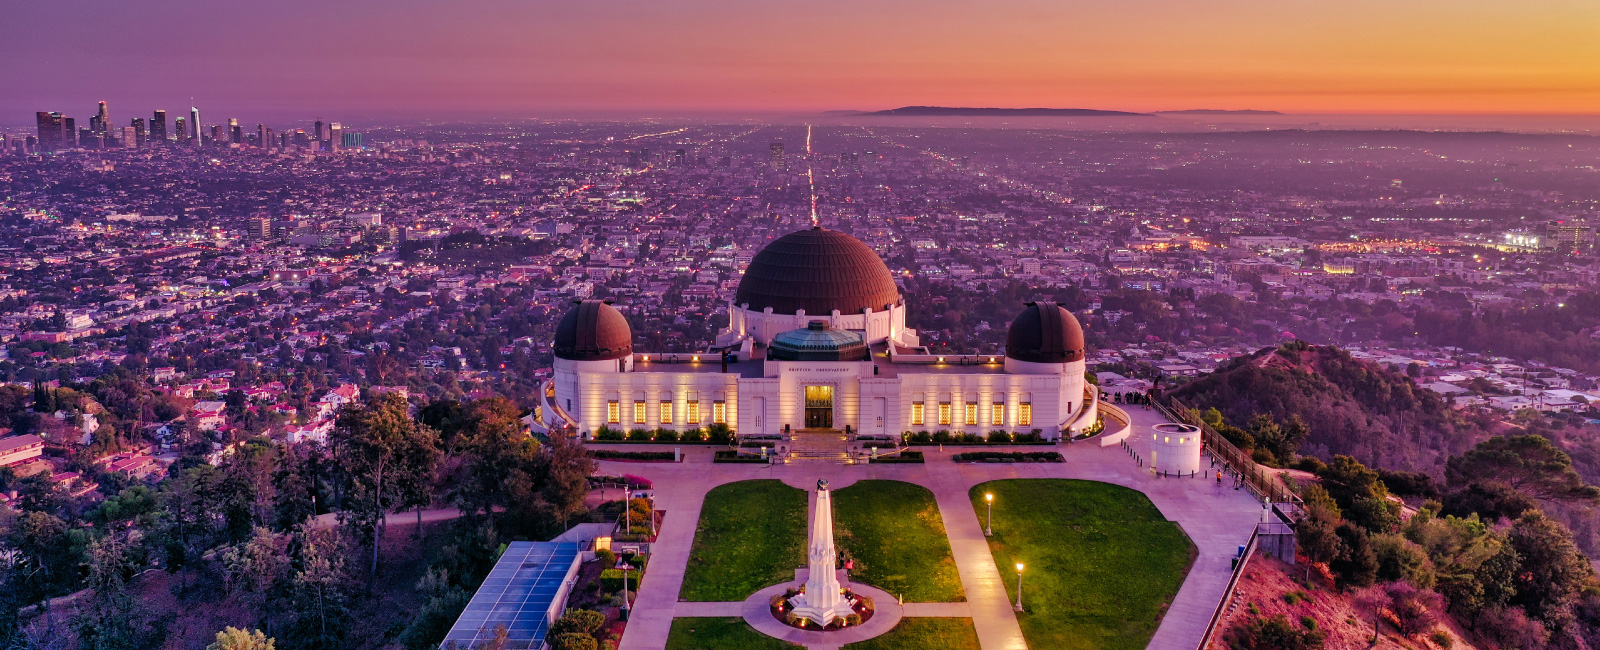 Griffith Observatory and LA at dusk